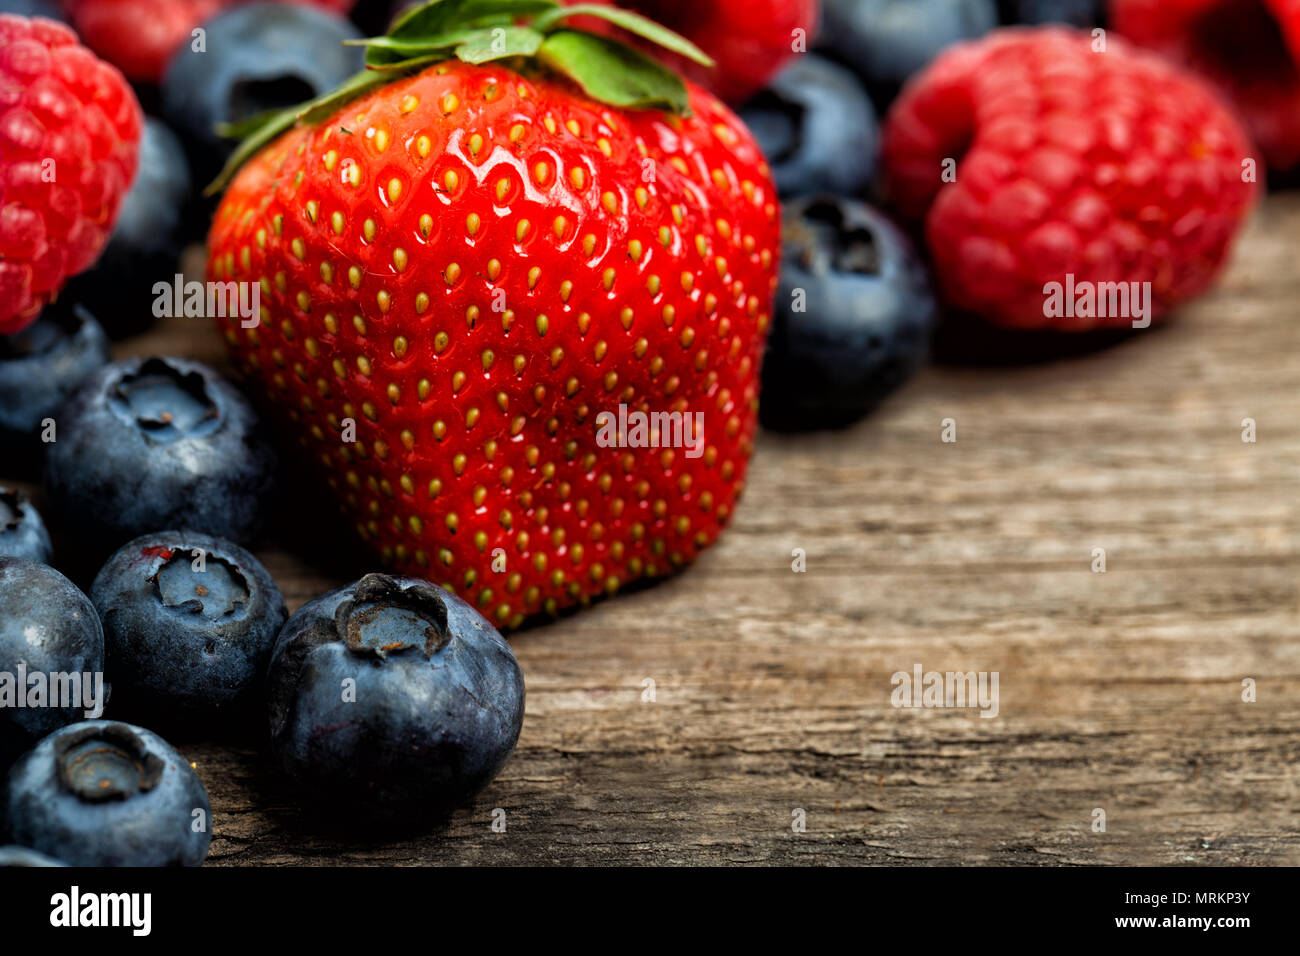 Summer strawberry, raspberry, blueberries on wooden table background. Healthy eating Stock Photo